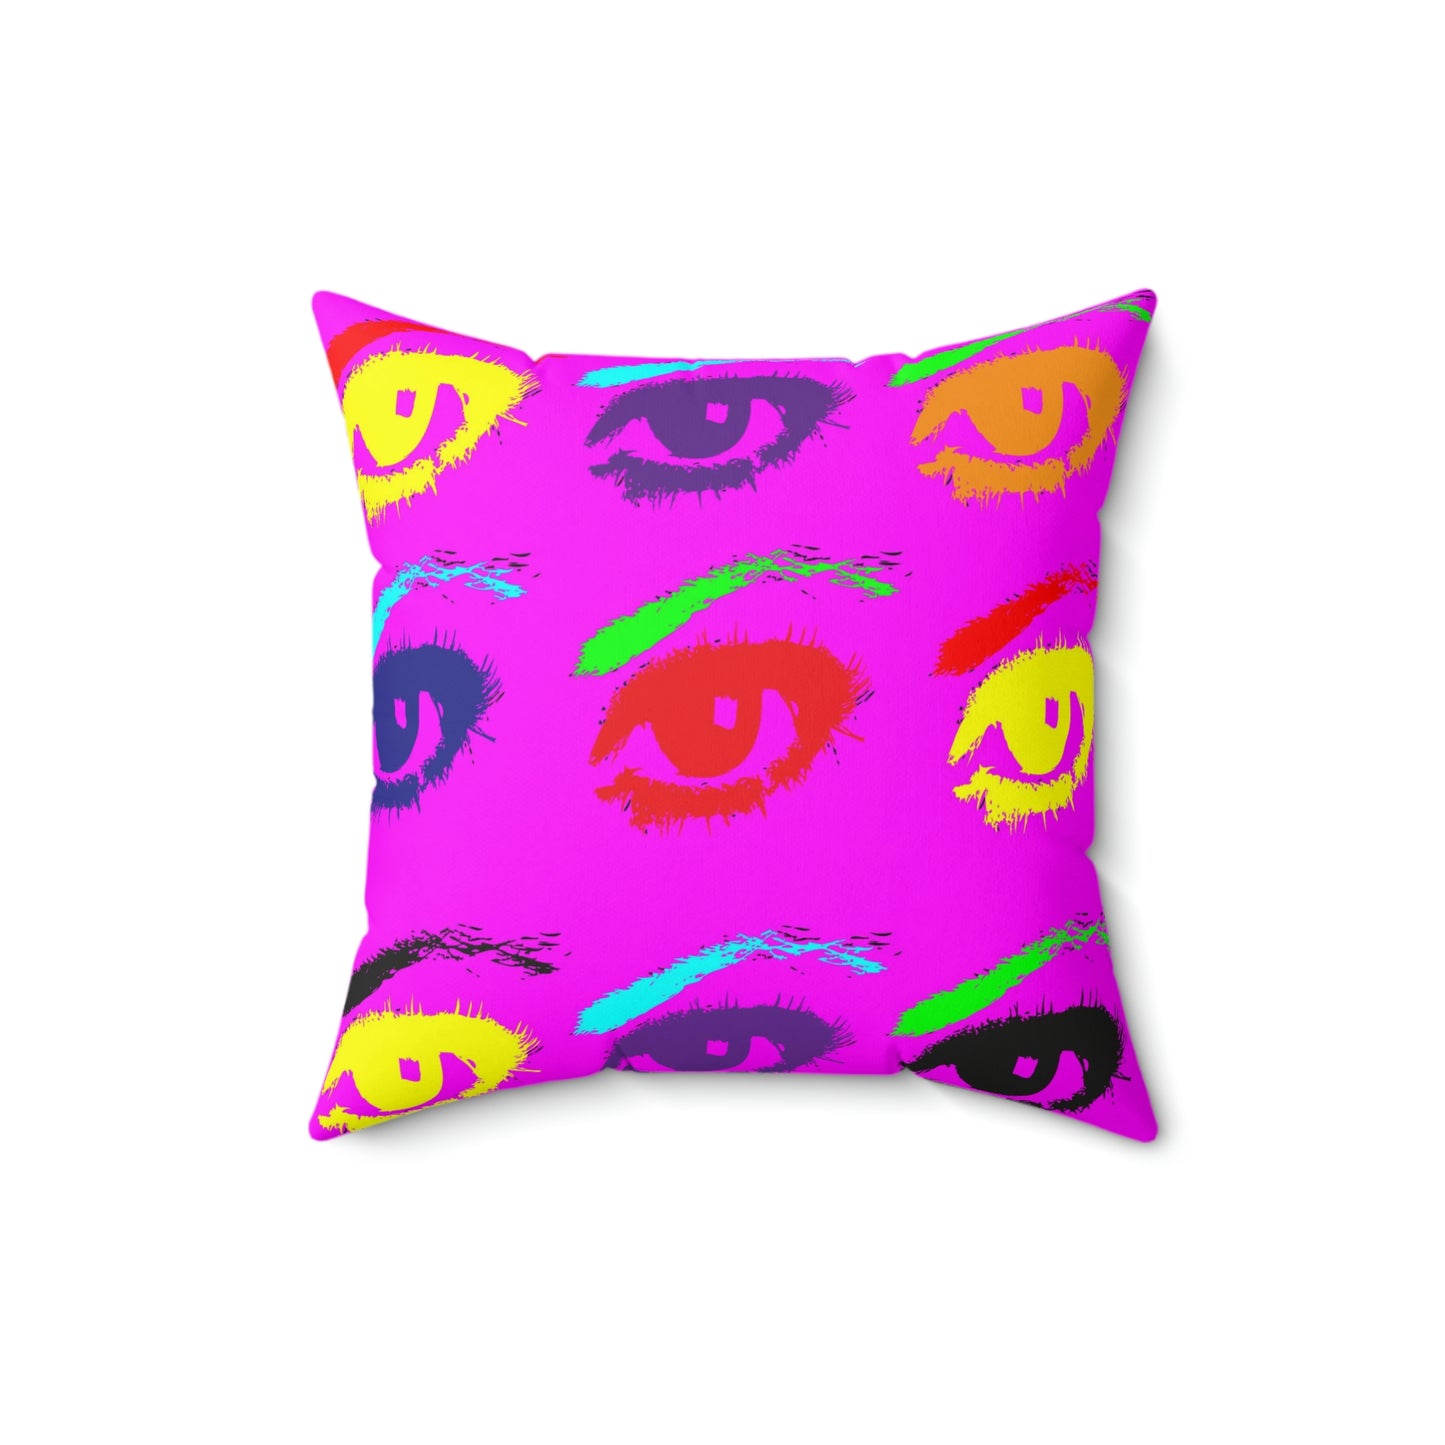 Geotrott Pink Warhol Style Eyes Art Multy Colored Eyes Grid Spun Polyester Square Pillow-Home Decor-Geotrott